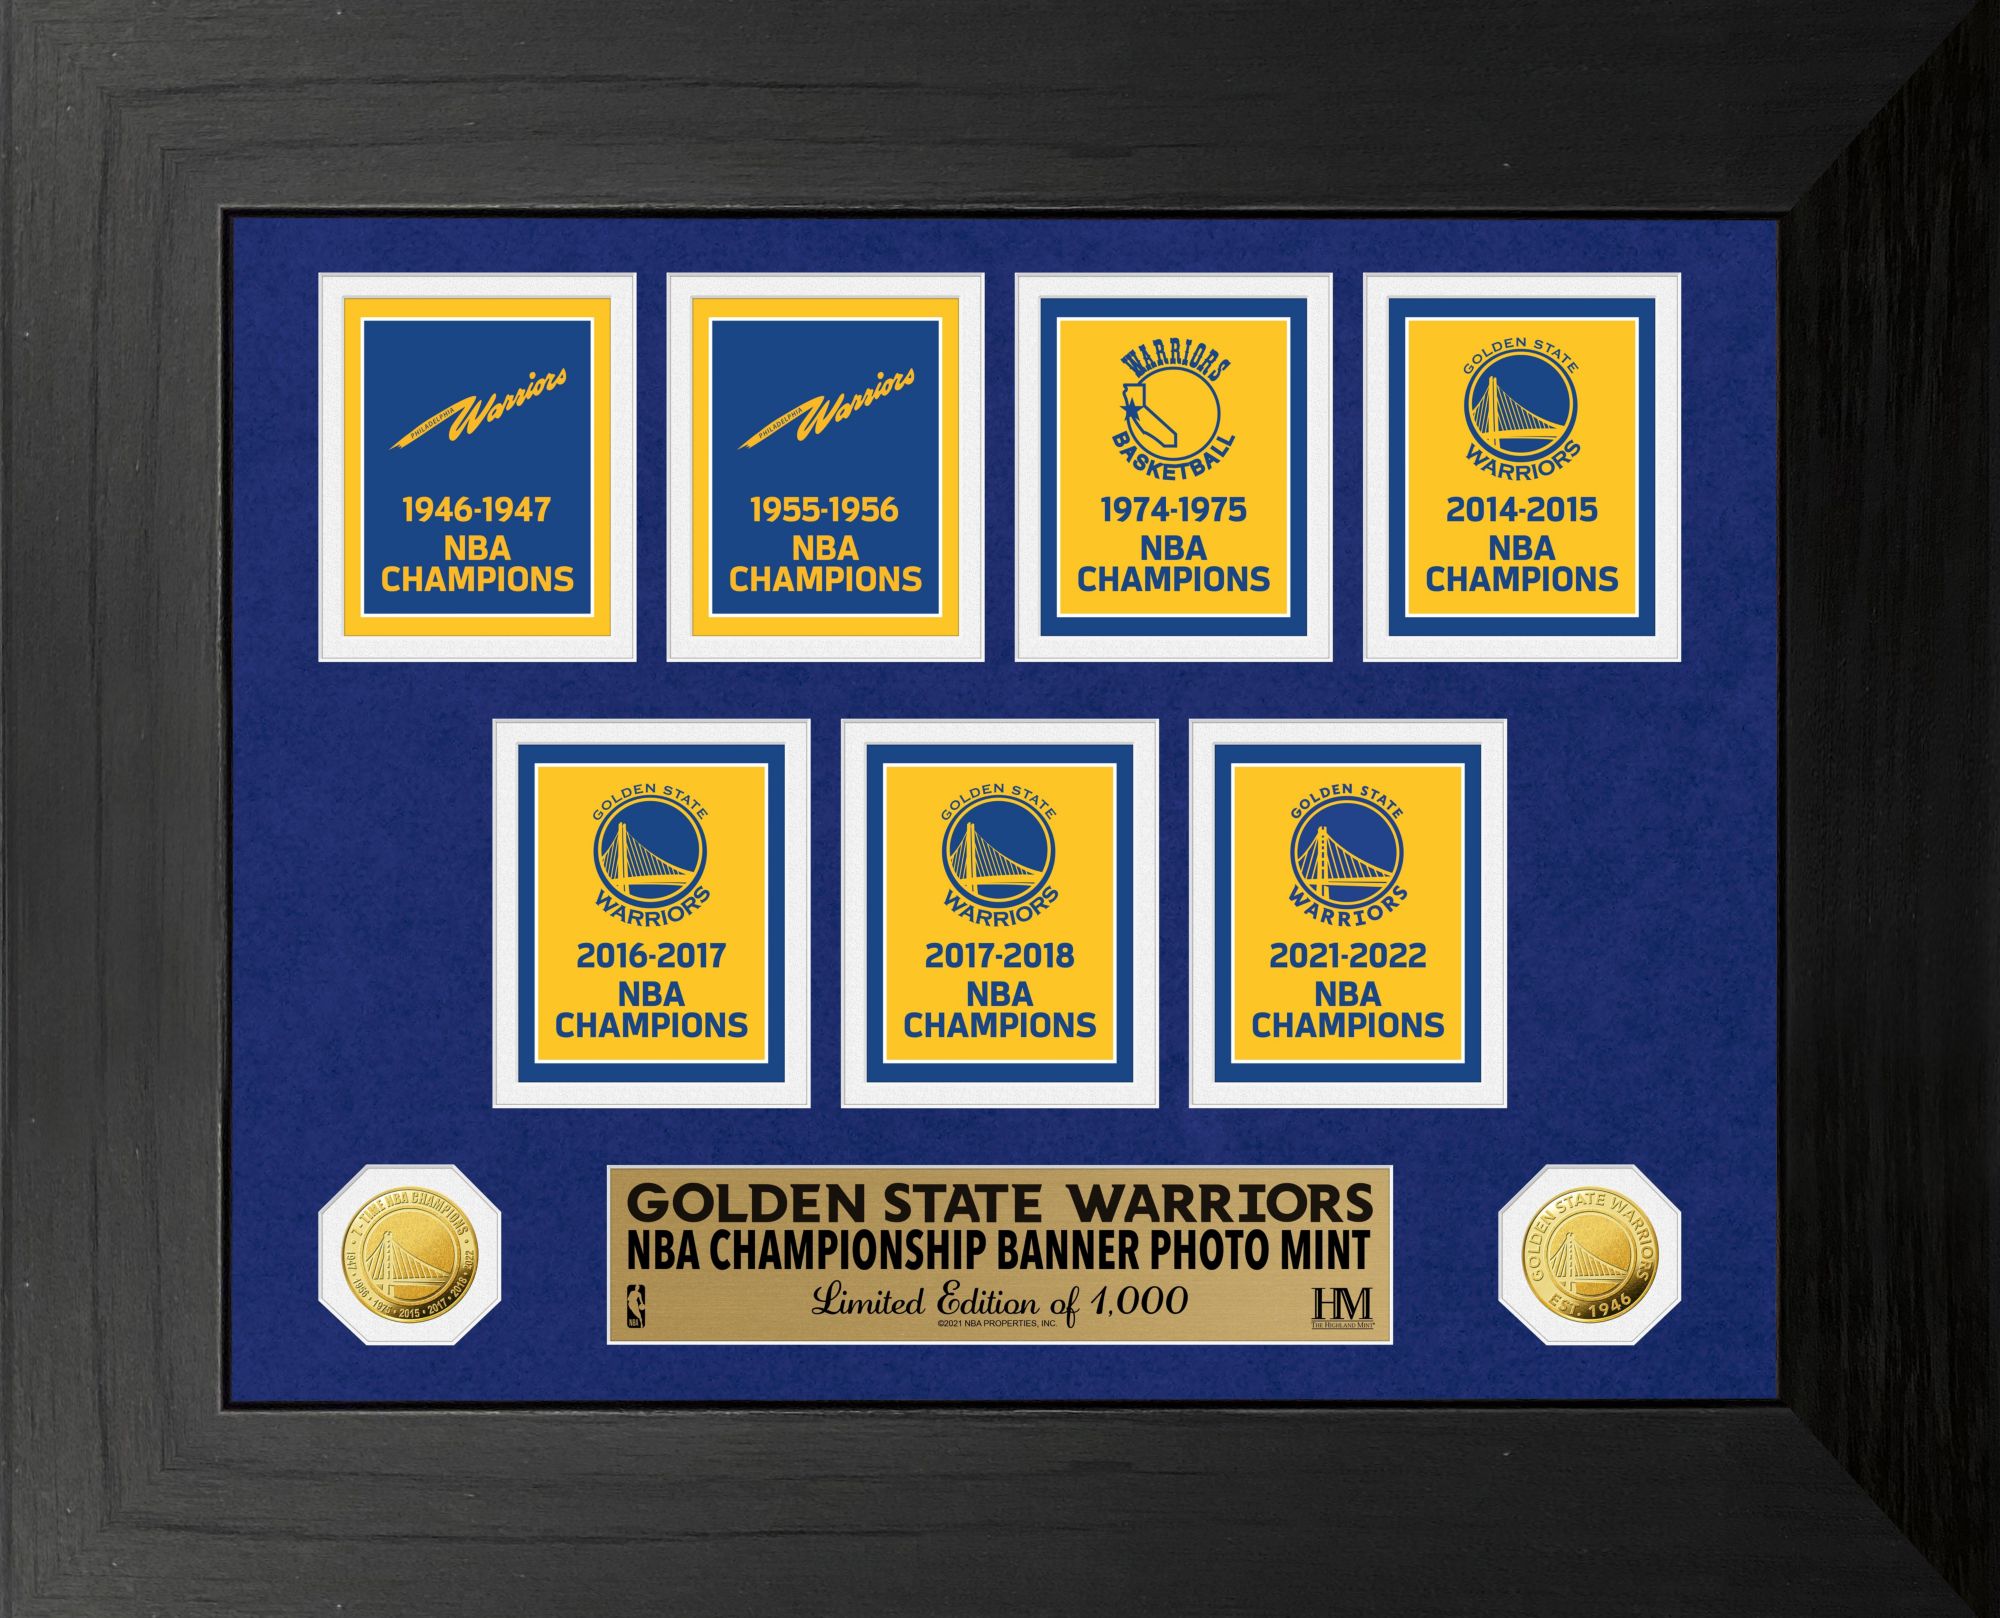 Golden State Warriors collectibles